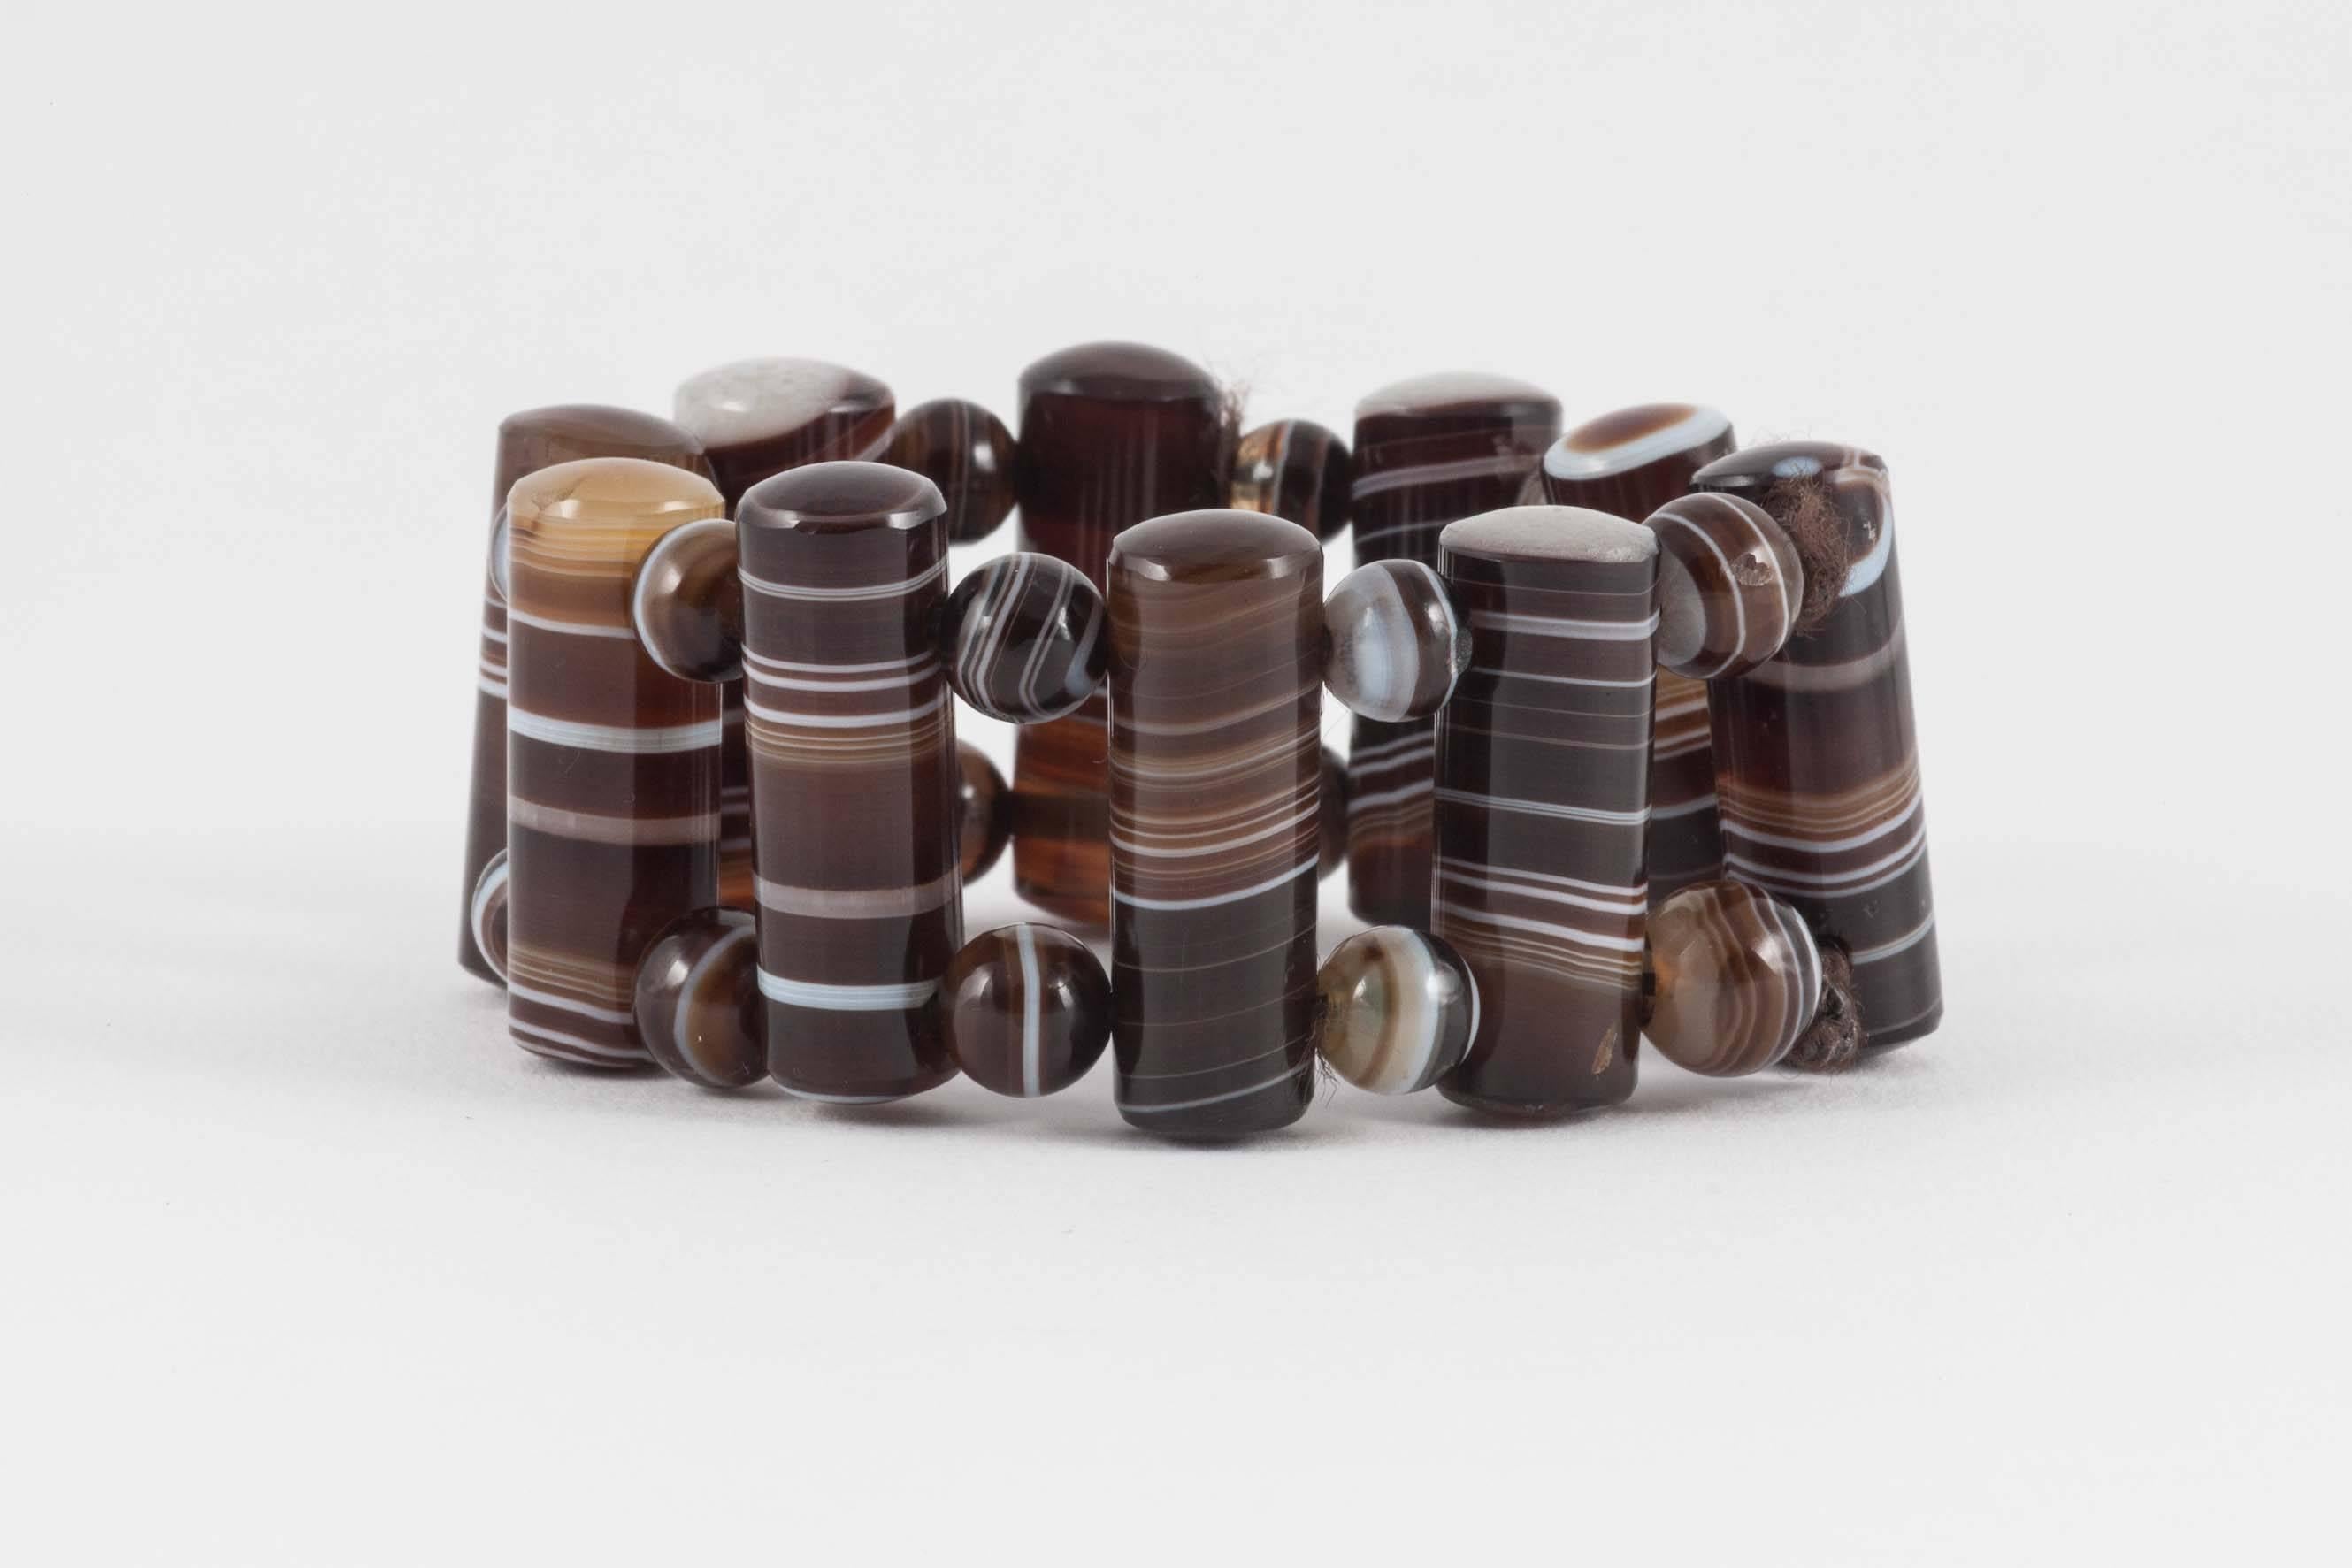 A lovely rich brown agate bracelet with a very tactile quality. The agate rods and beads show a pleasing mix of colours from black to brown, yellow and gray.  It creates a very harmonious composition. This bracelet benefits from being strung on